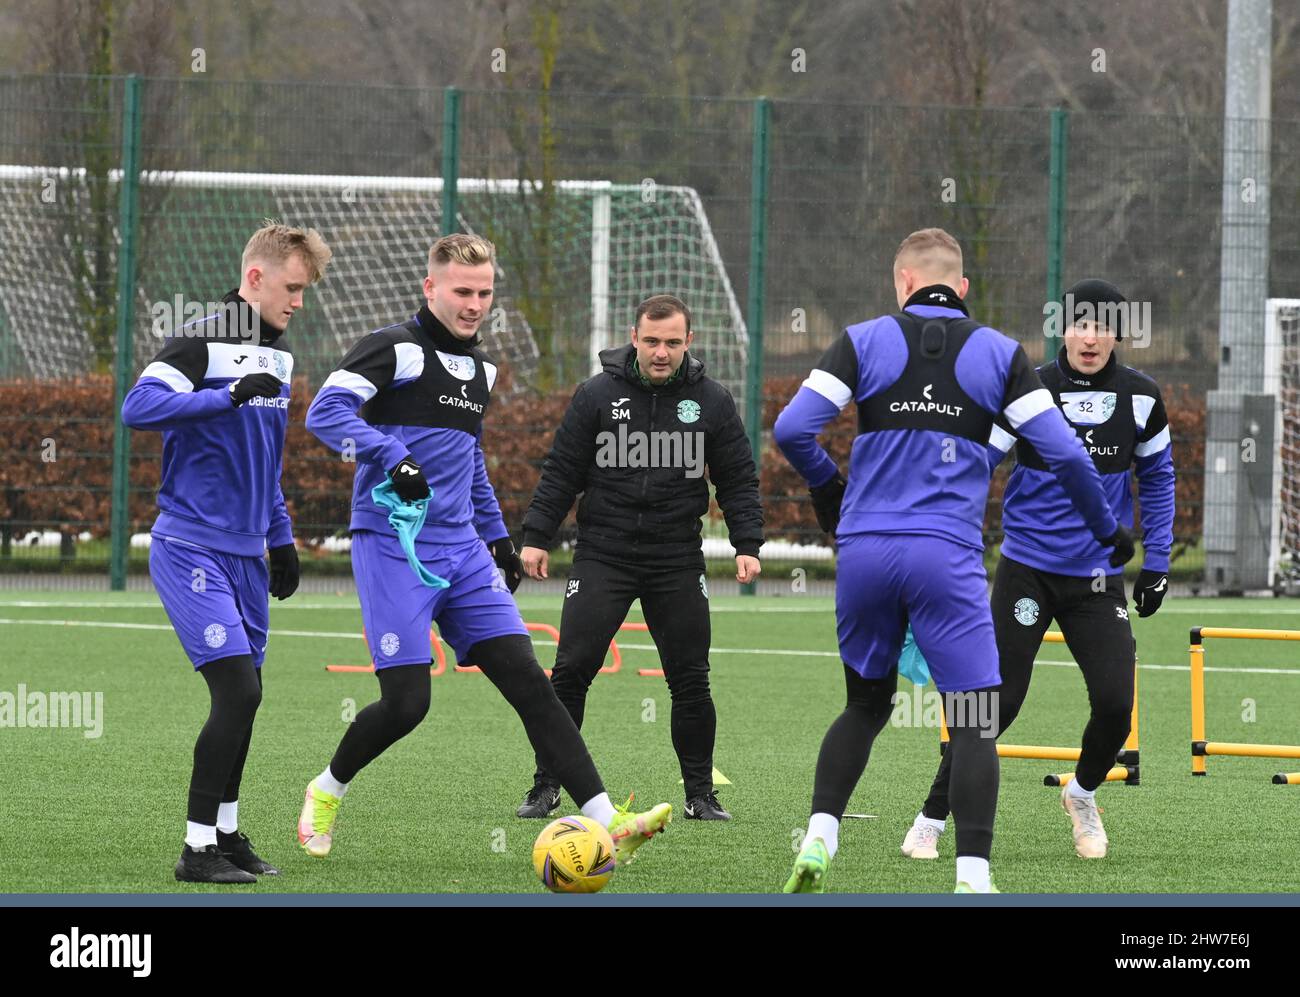 East Mains.Ormiston.Tranent.East Lothian.Scotland.UK.4th March 22 Hibs' Manager, Shaun Maloney, Euan Henderson, James Scott, Josh Campbell & during training session for Cinch Premiership match with St Johnstone Credit: eric mccowat/Alamy Live News Stock Photo